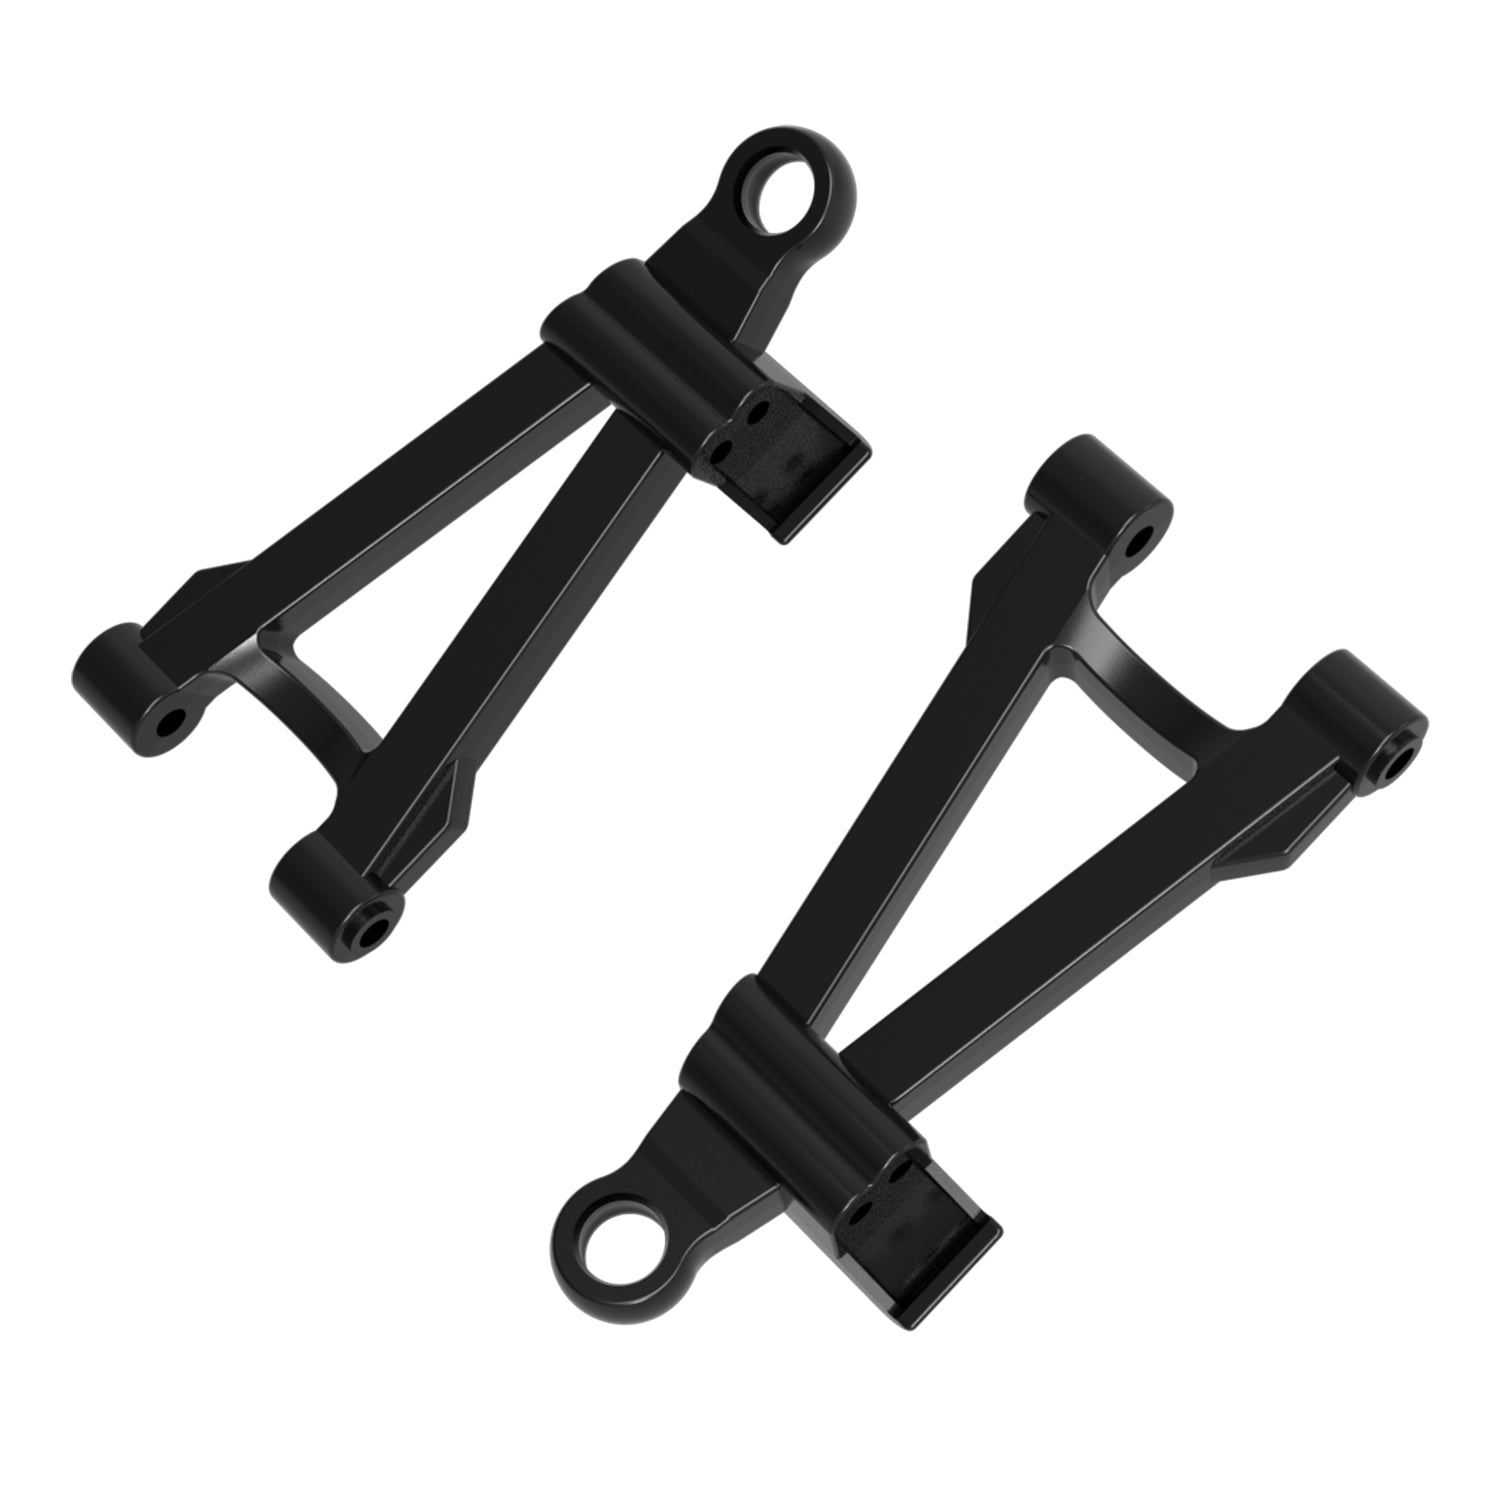 1 set of Lower Suspension Bracket (Left & Right) for 1/16 Remote Control Truck Crossy / Sand Storm / Tornado